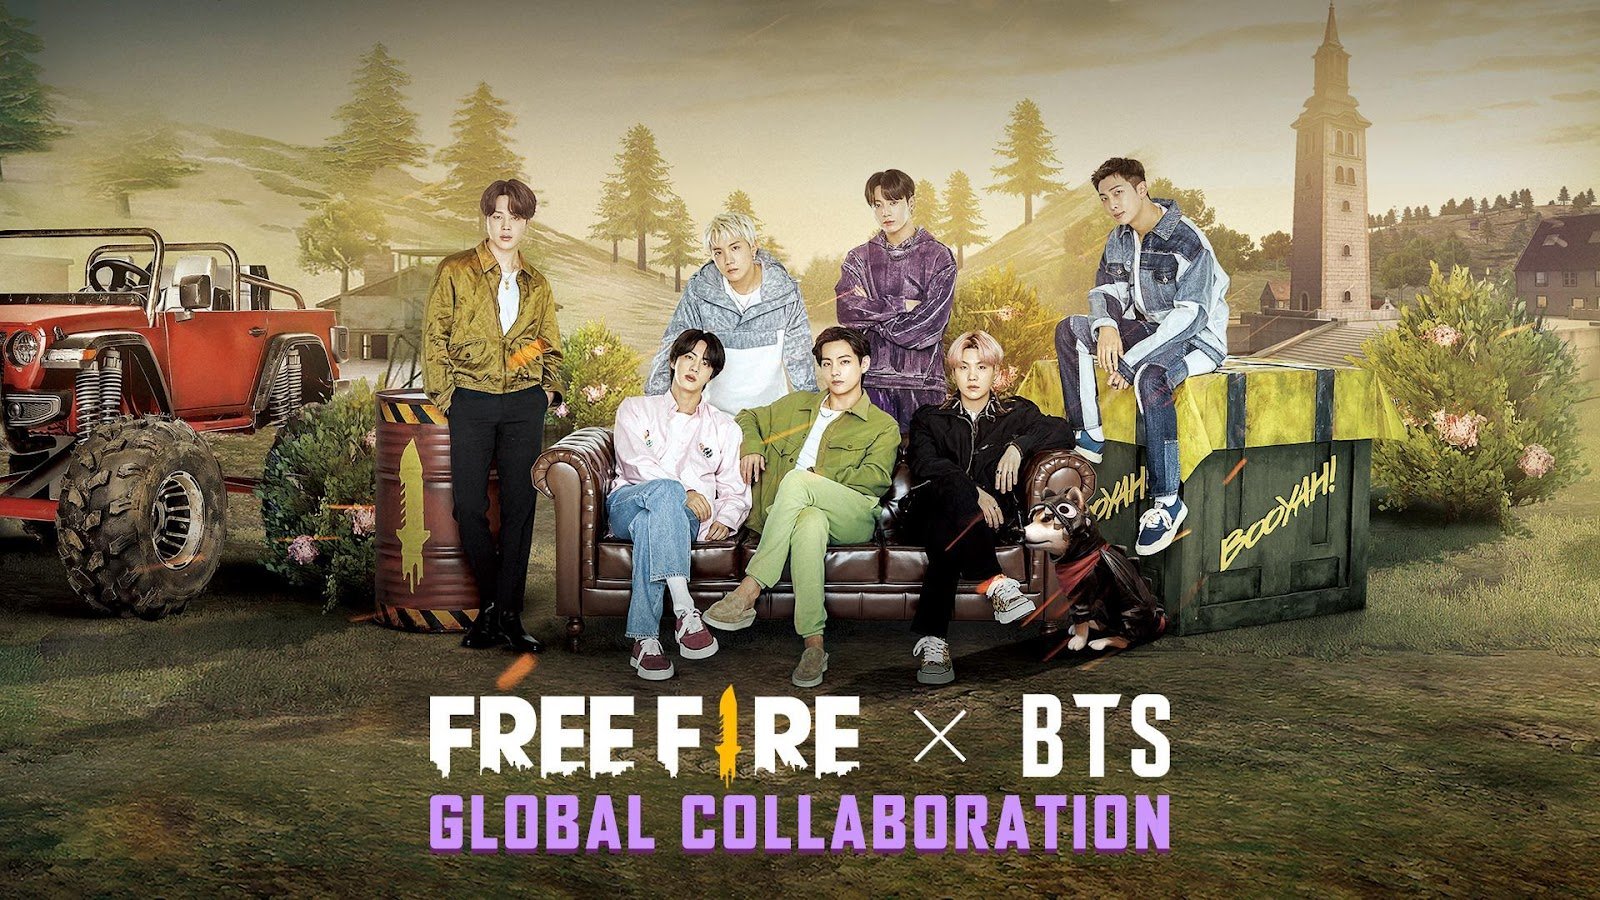 free fire x bts collaboration india image